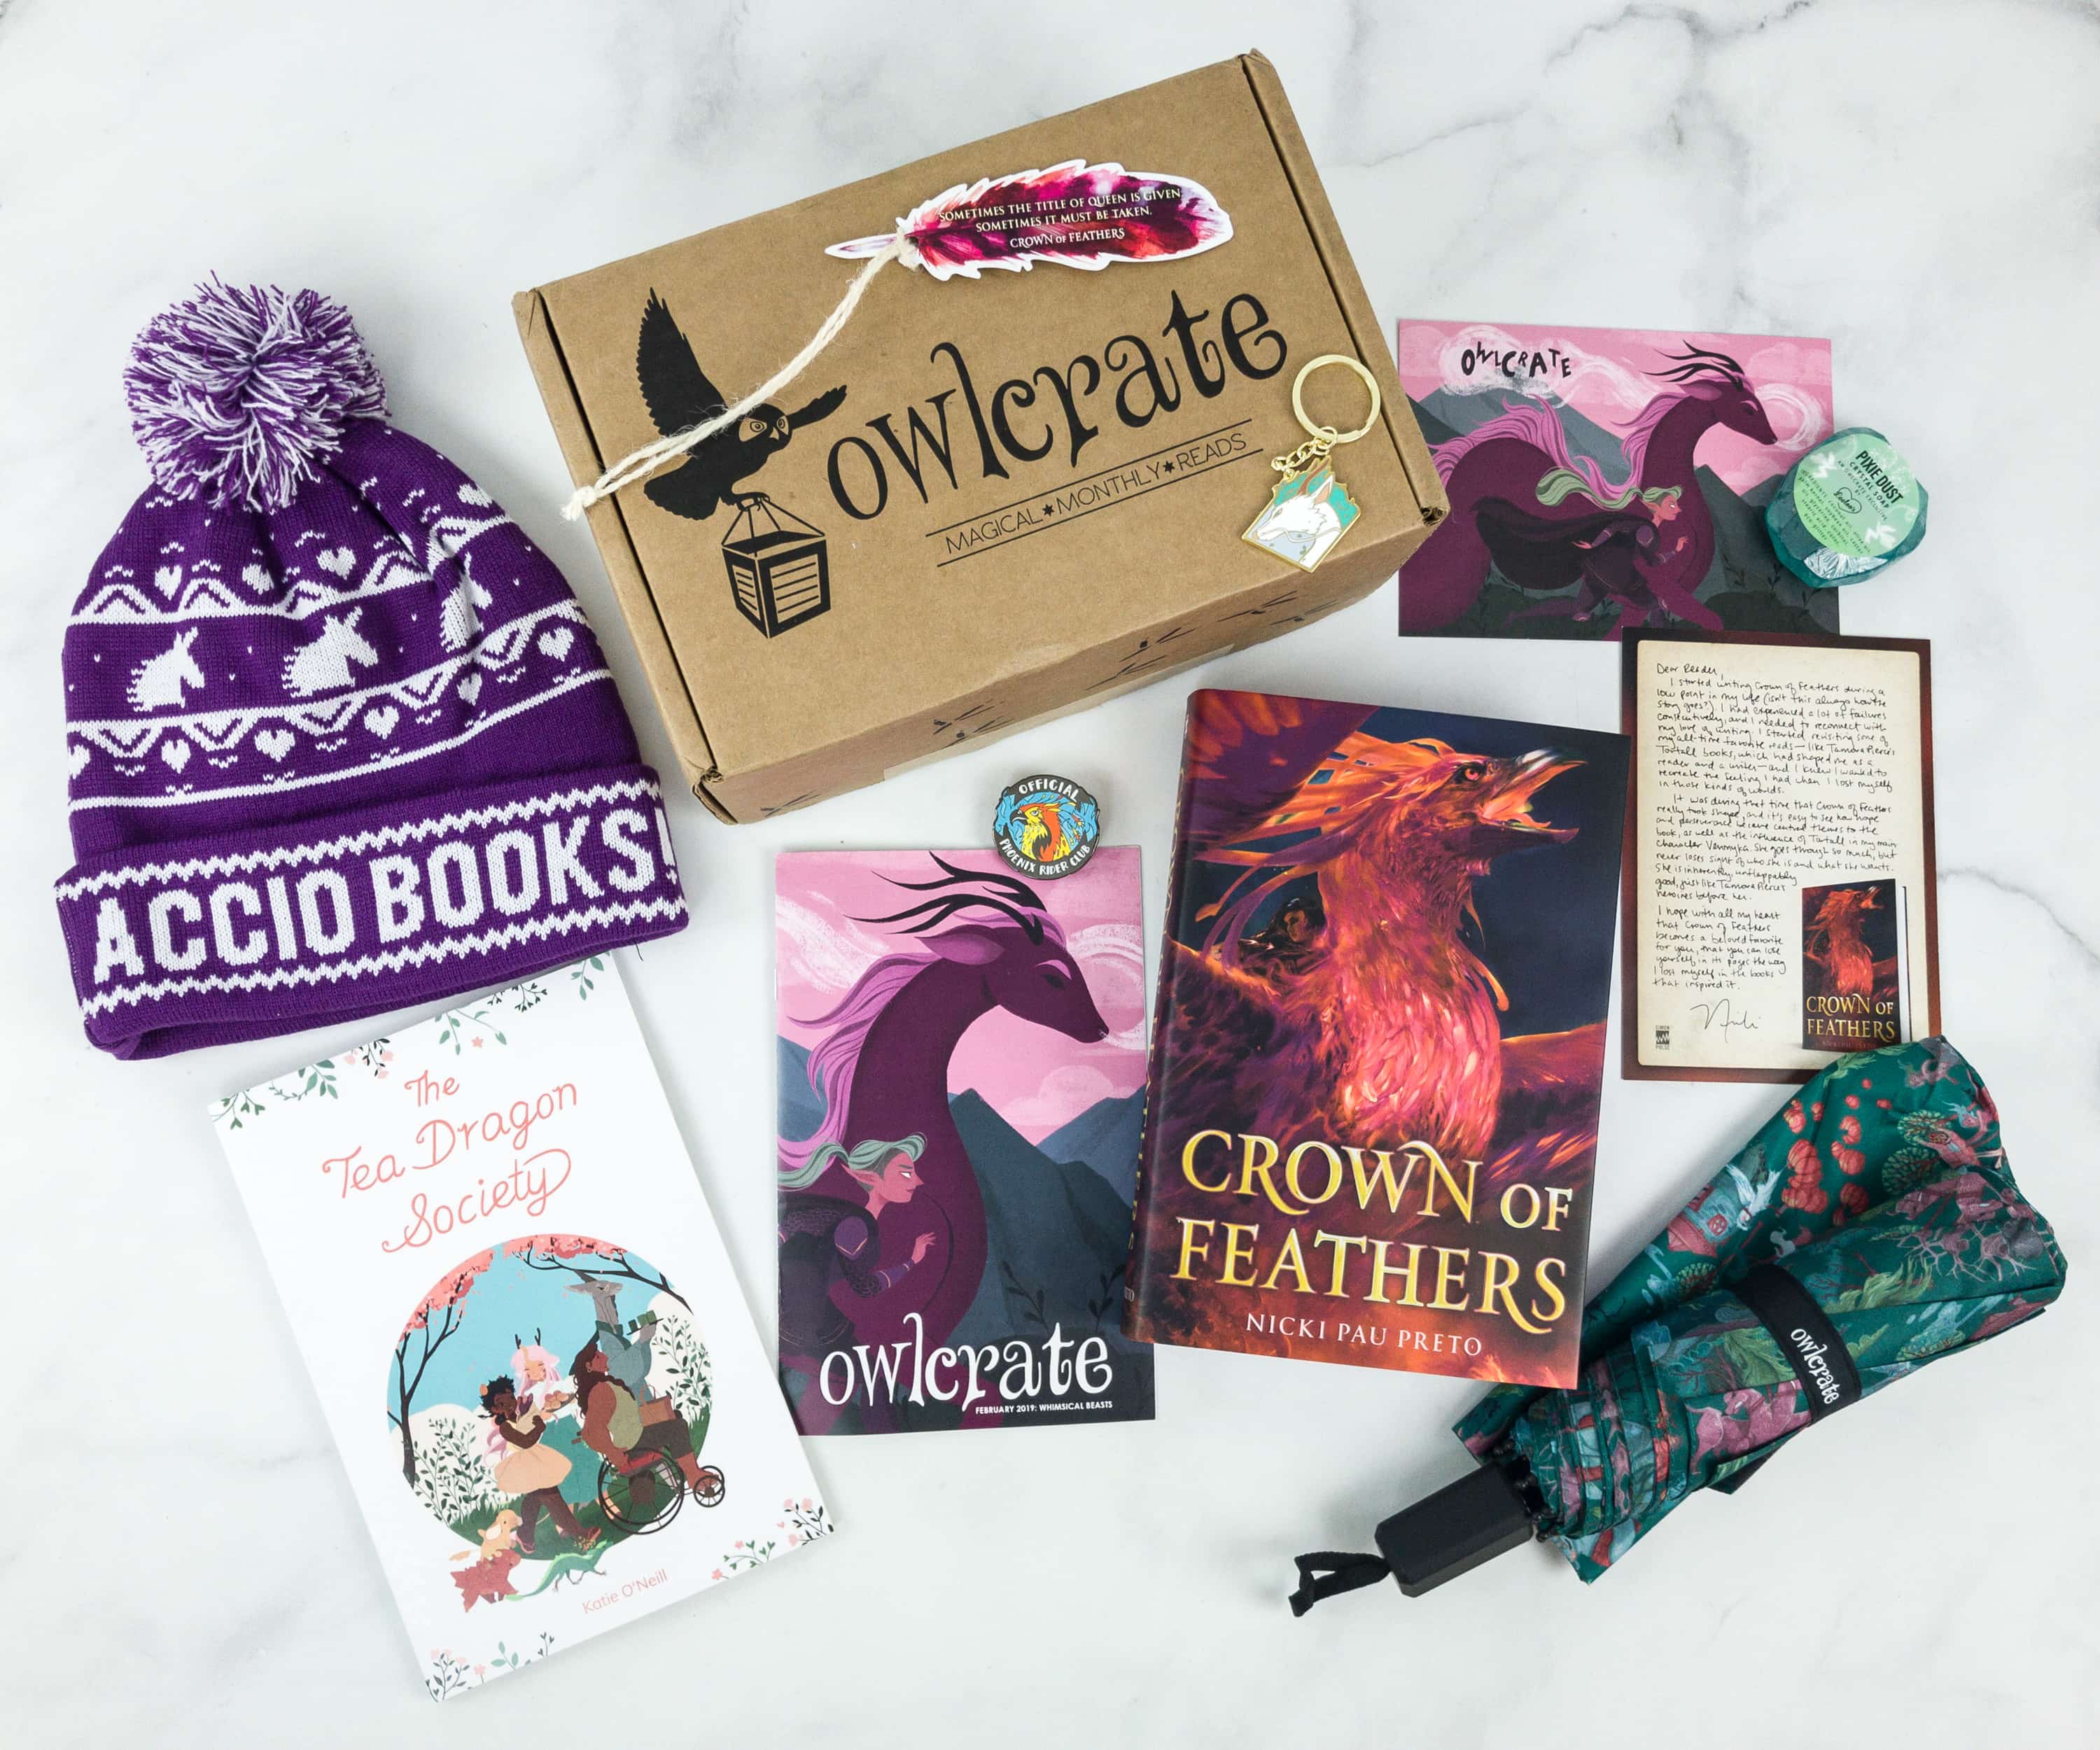 Wings of Shadow (Exclusive OwlCrate Edition)